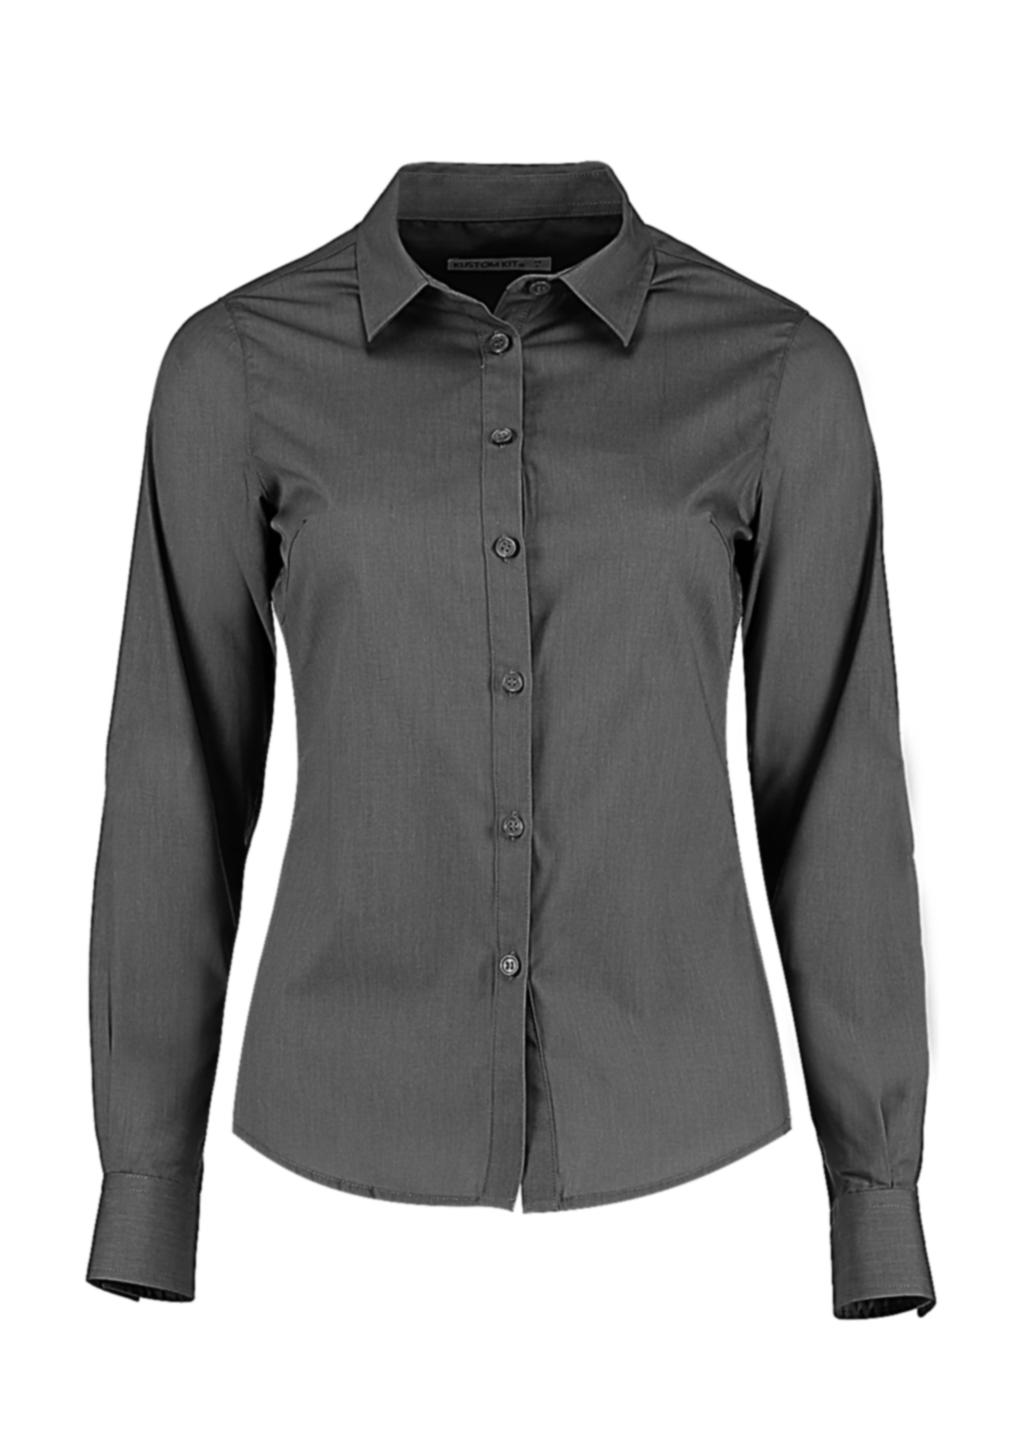  Womens Tailored Fit Poplin Shirt in Farbe Graphite